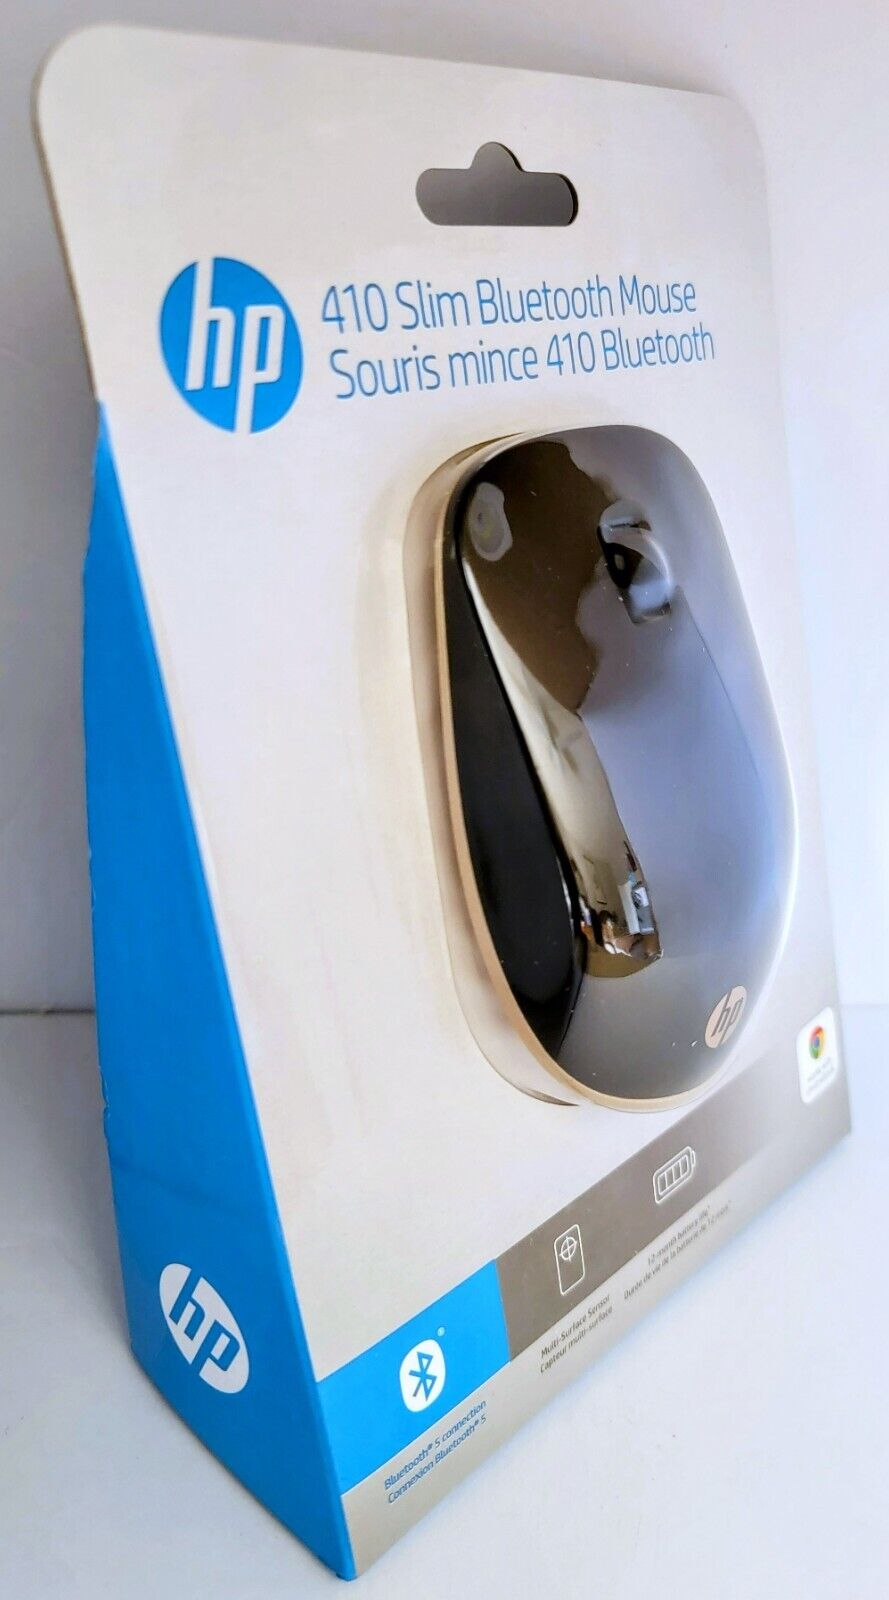 HP SLIM Bluetooth Mouse MULTI-SURFACE 12-month Battery Wireless Laser Optical